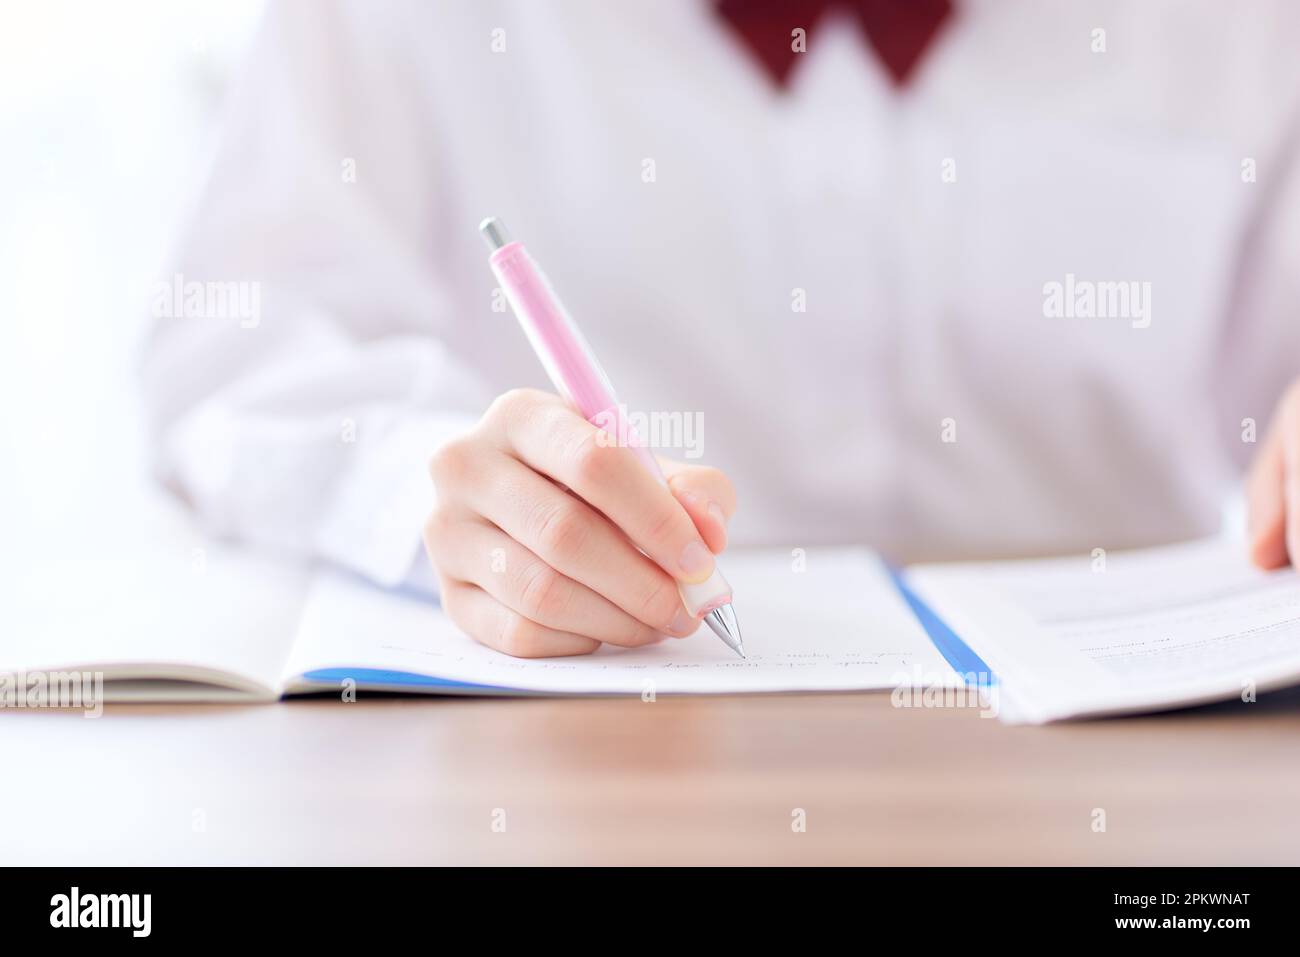 Japanese high school student in uniform studying Stock Photo